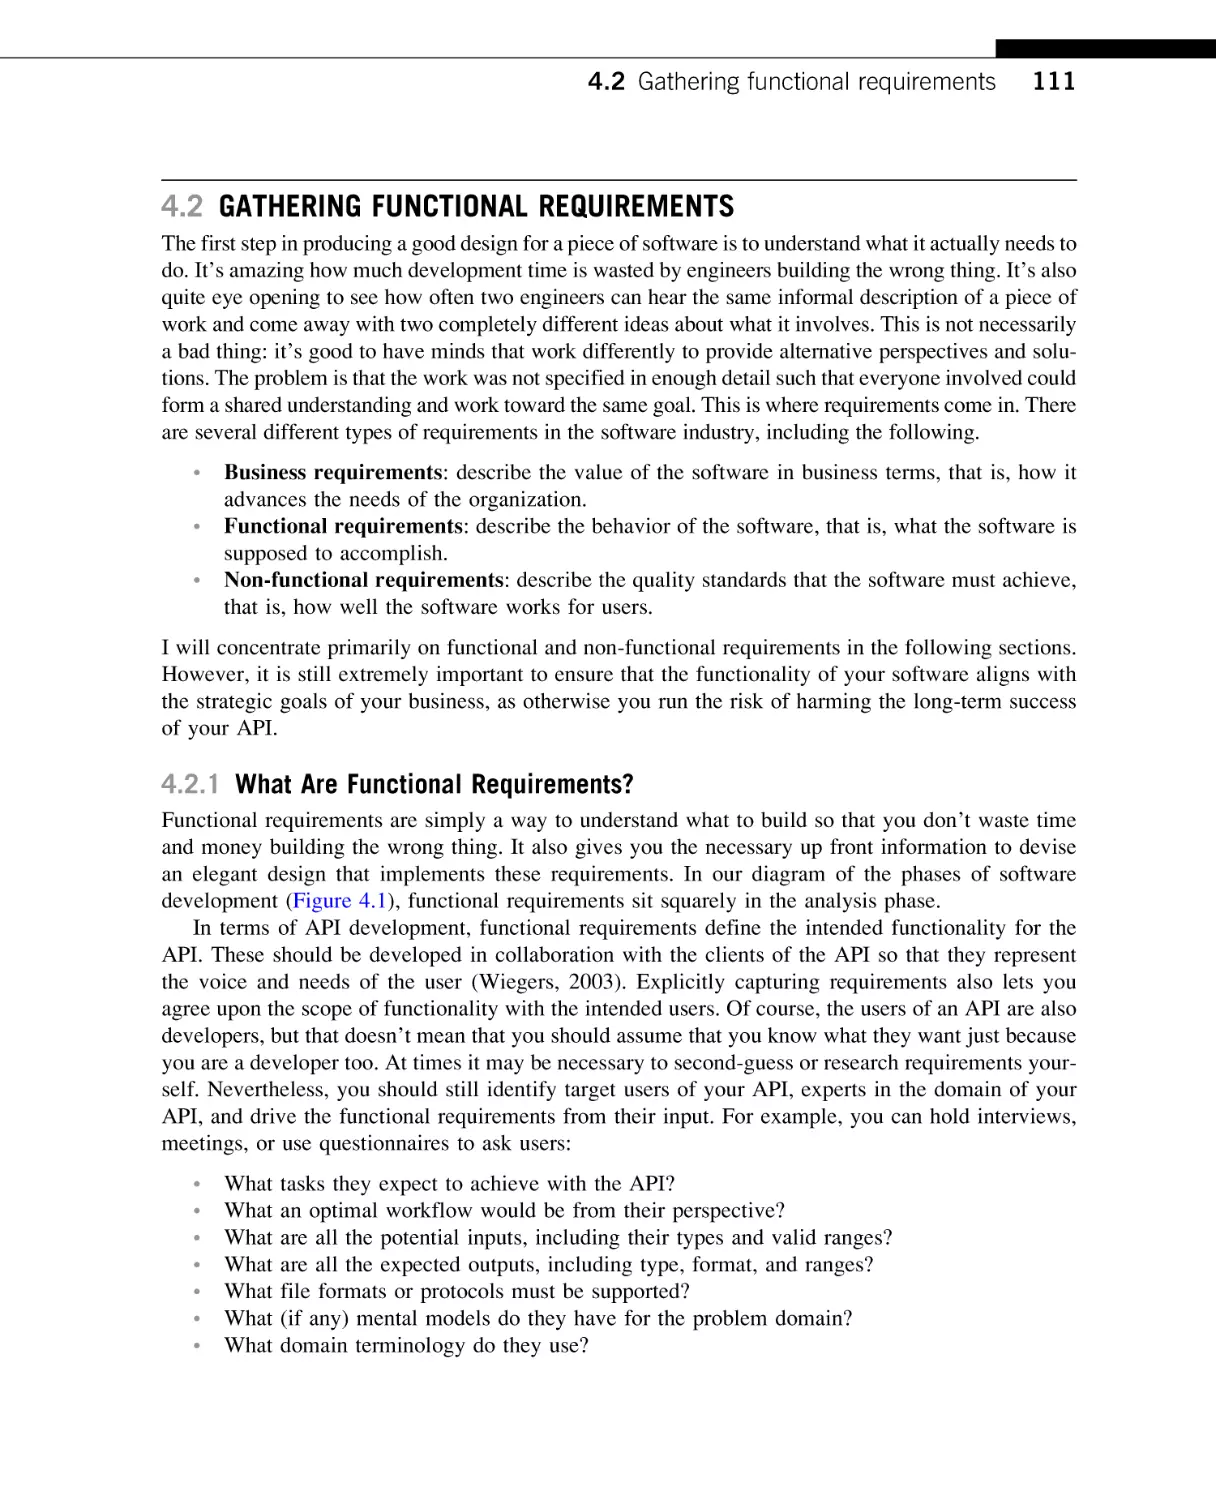 Gathering Functional Requirements
What Are Functional Requirements?